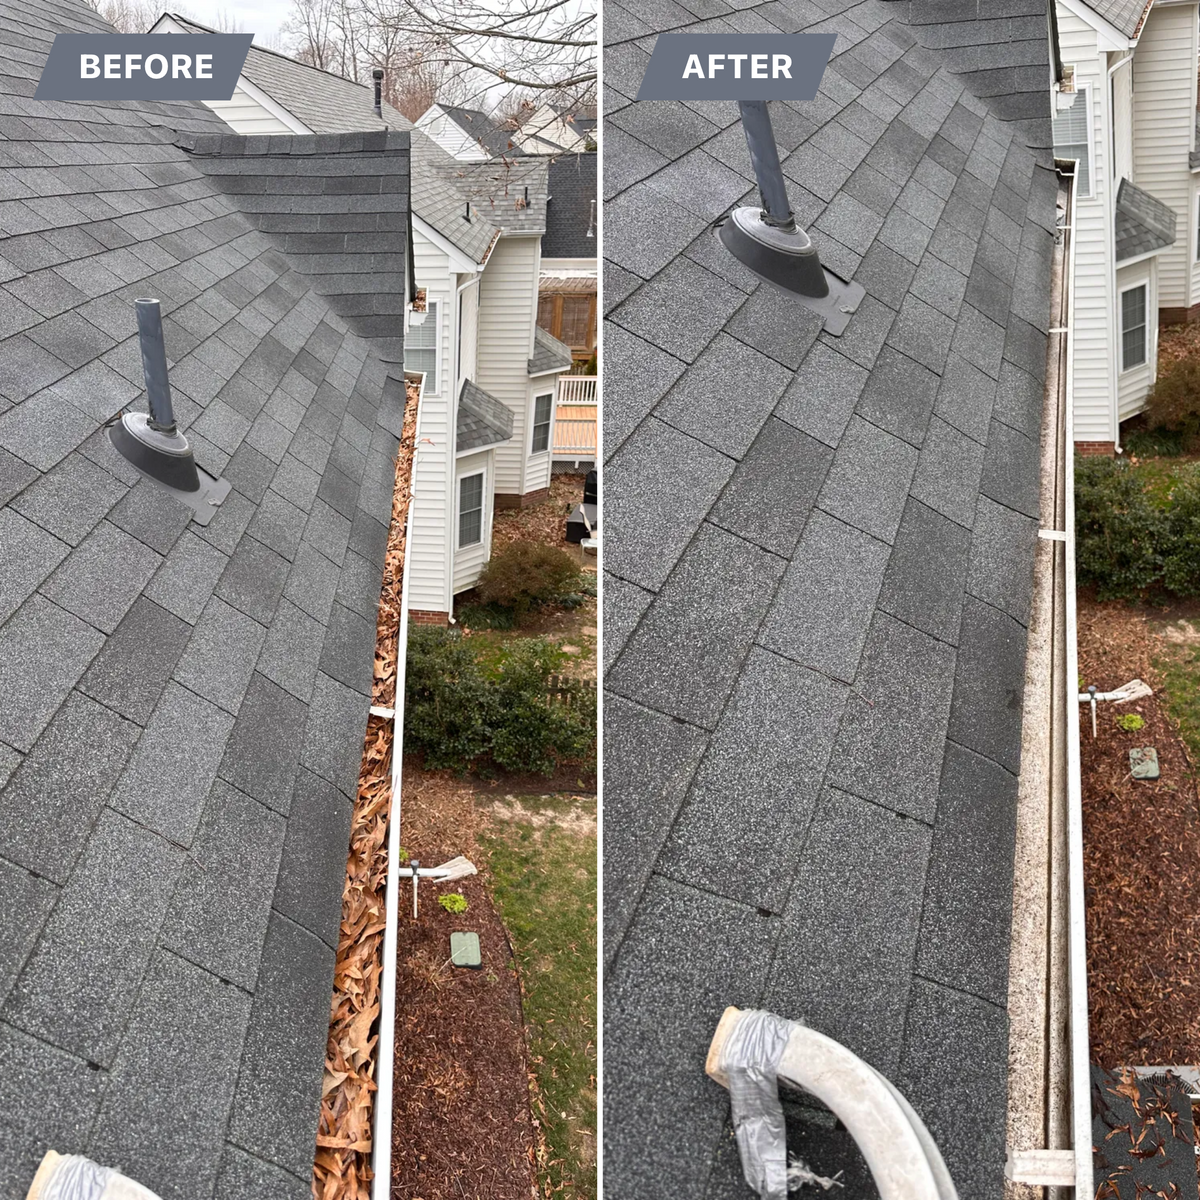 Gutter Cleaning for LeafTide Solutions in Richmond, VA